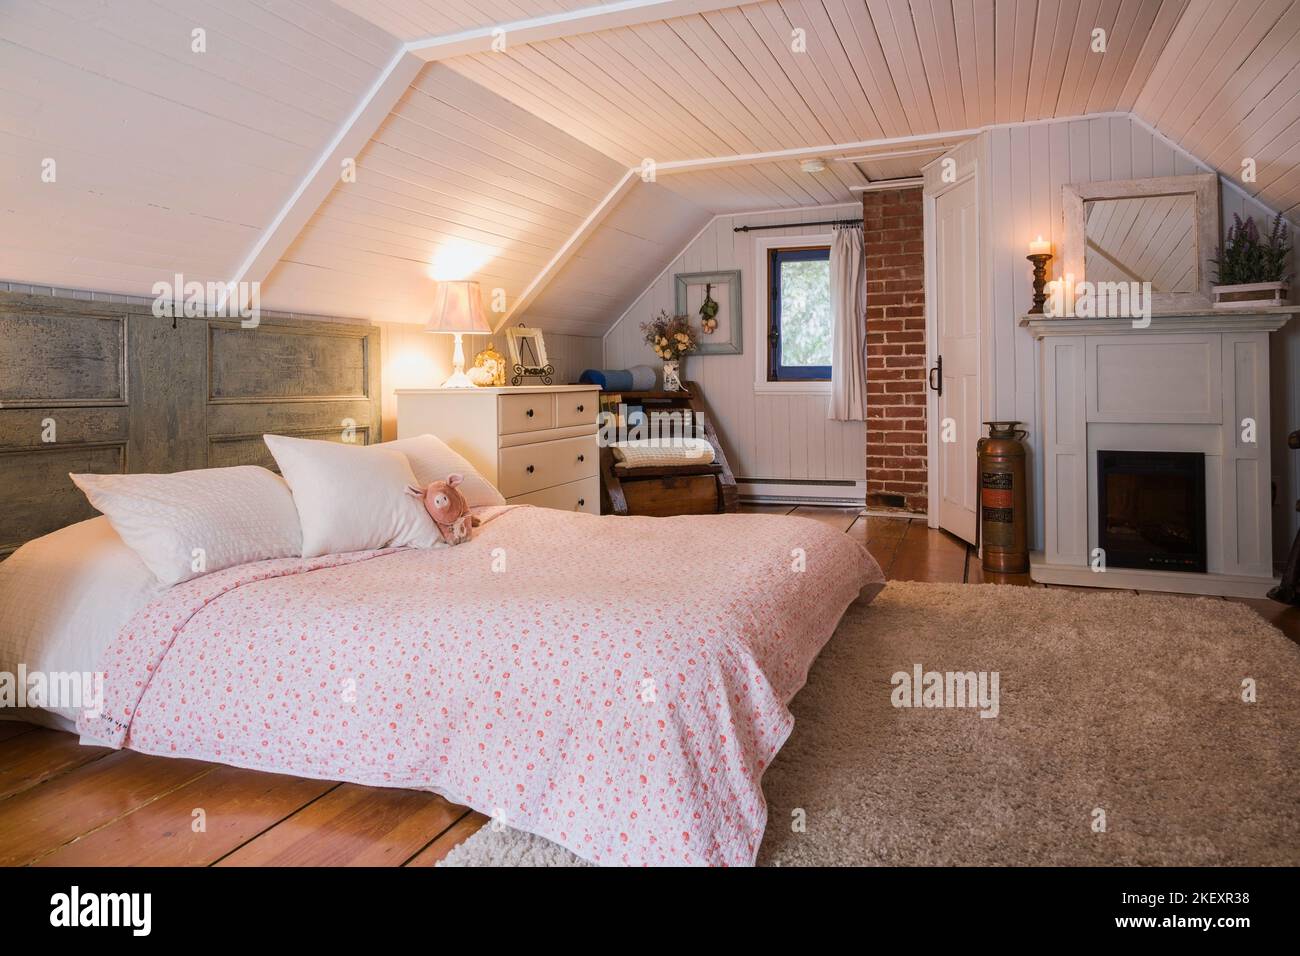 King size bed with salvaged door as a headboard and antique furniture in the master bedroom on the upstairs floor inside an old 1862 home. Stock Photo